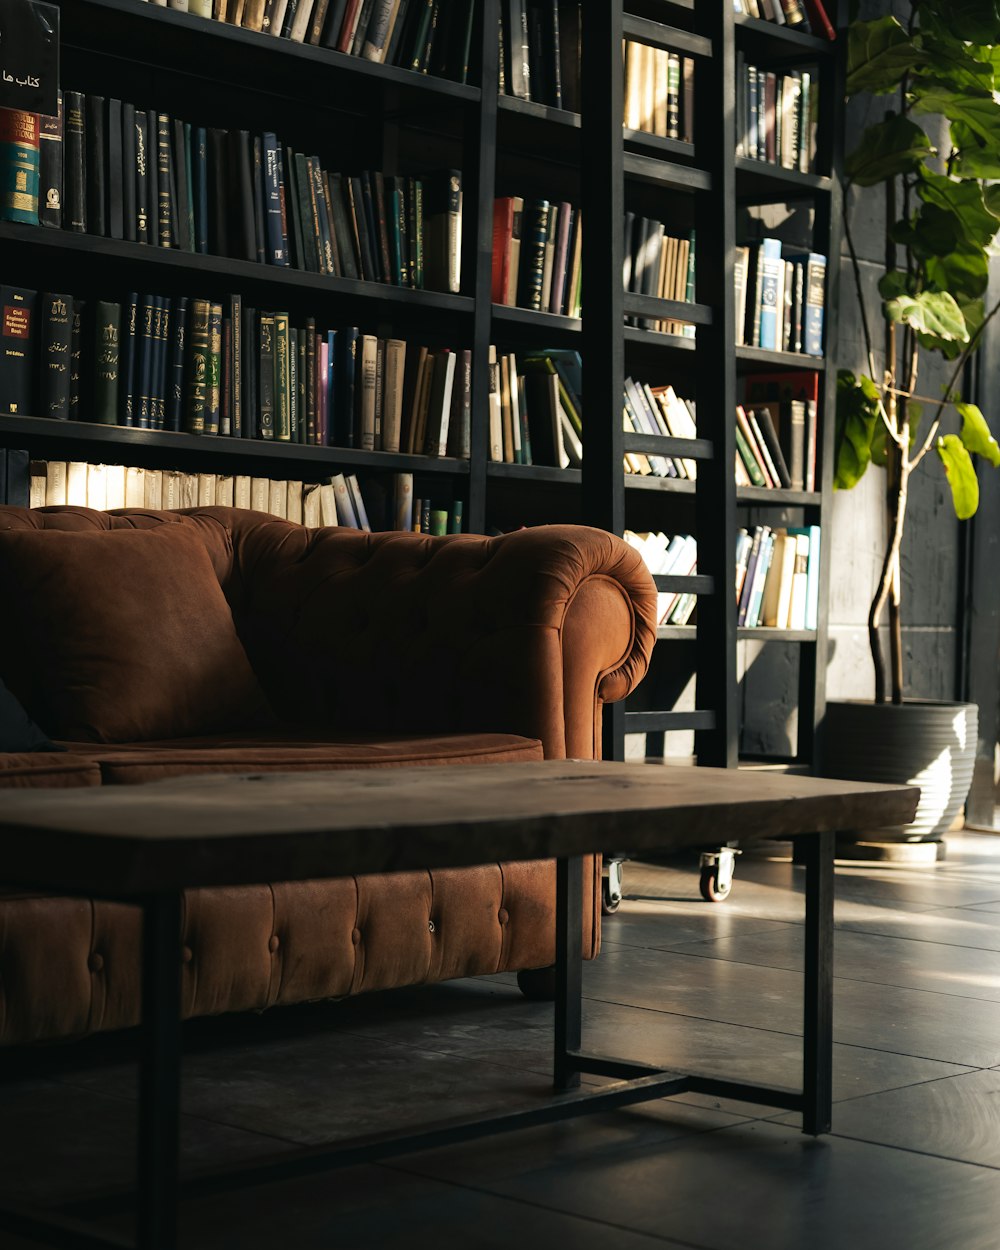 a couch sitting in front of a book shelf filled with books